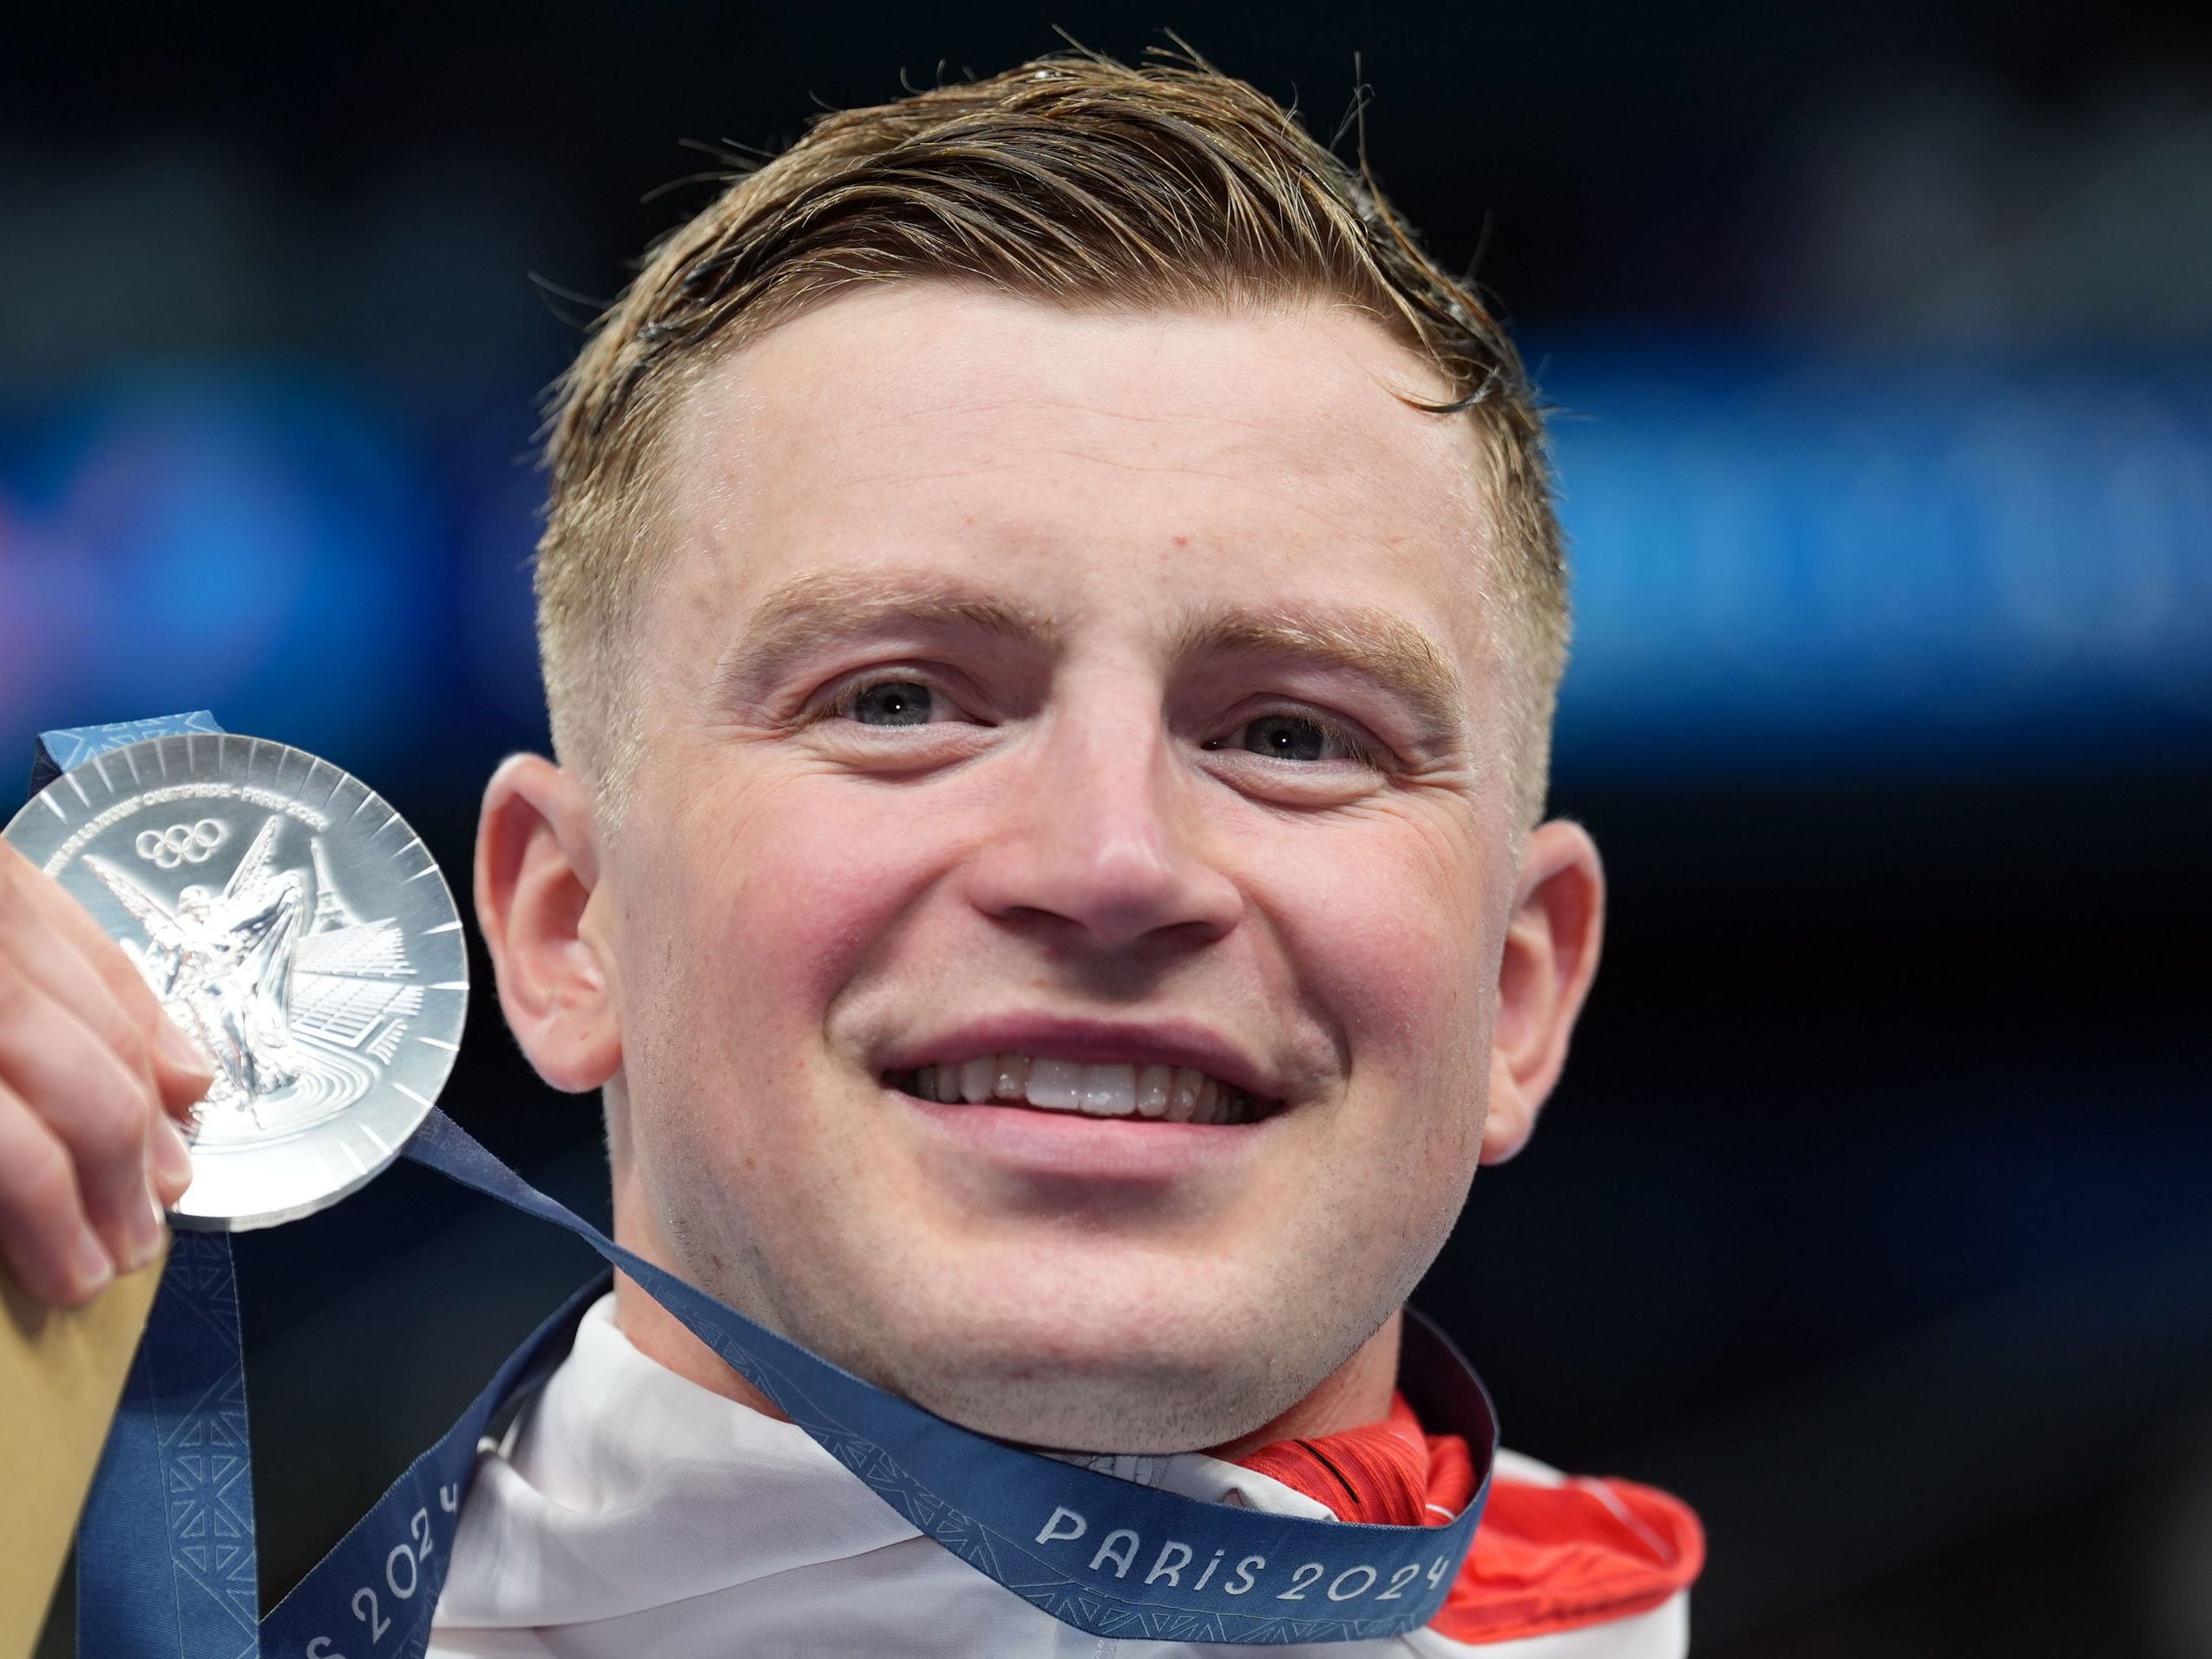 Adam Peaty reveals illness after being denied historic gold